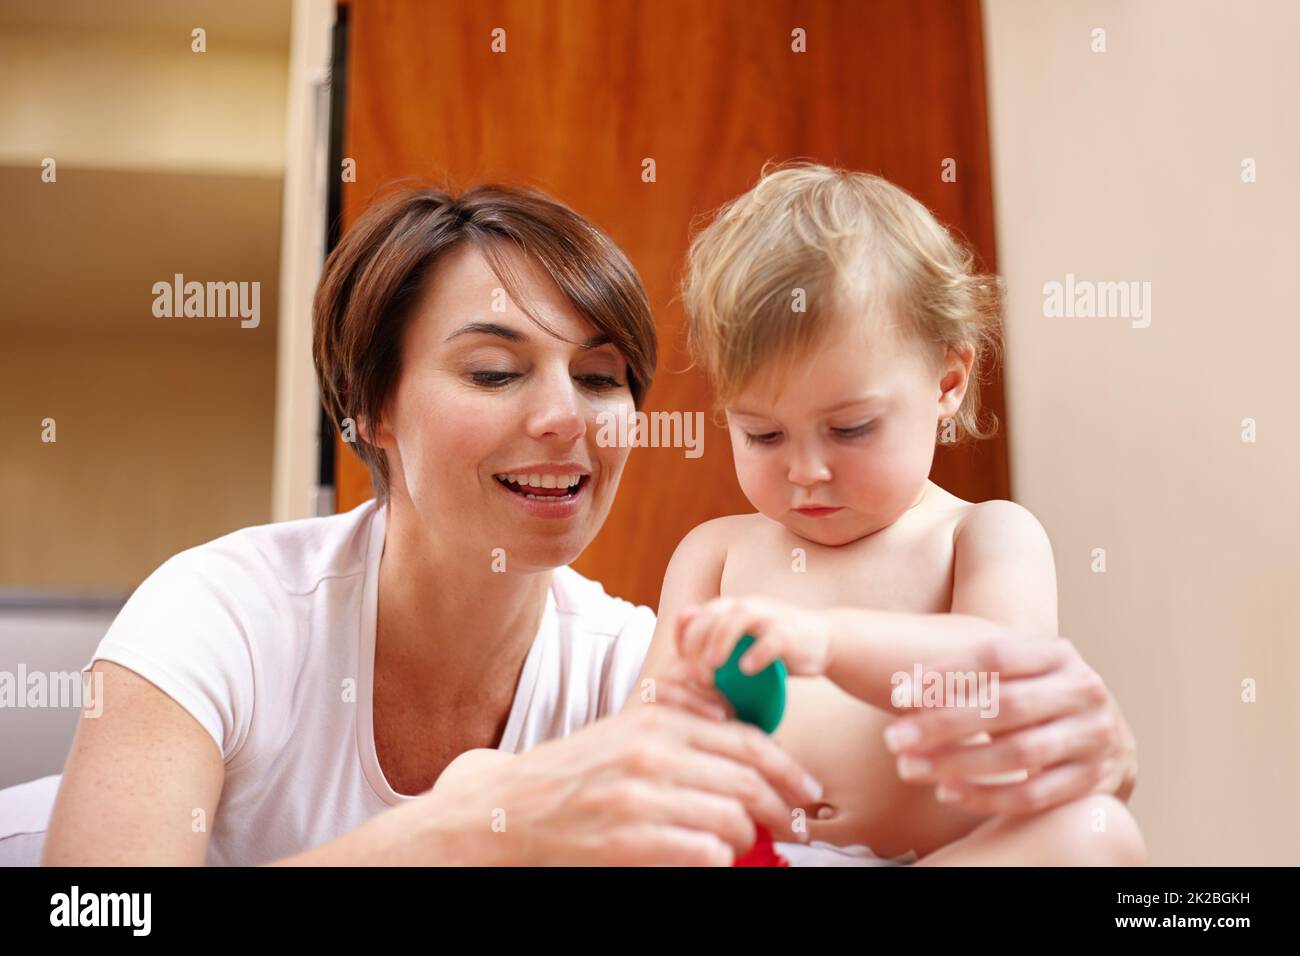 Youre such a big girl, holding it by yourself. A mother showing her baby girl a colorful spoon. Stock Photo